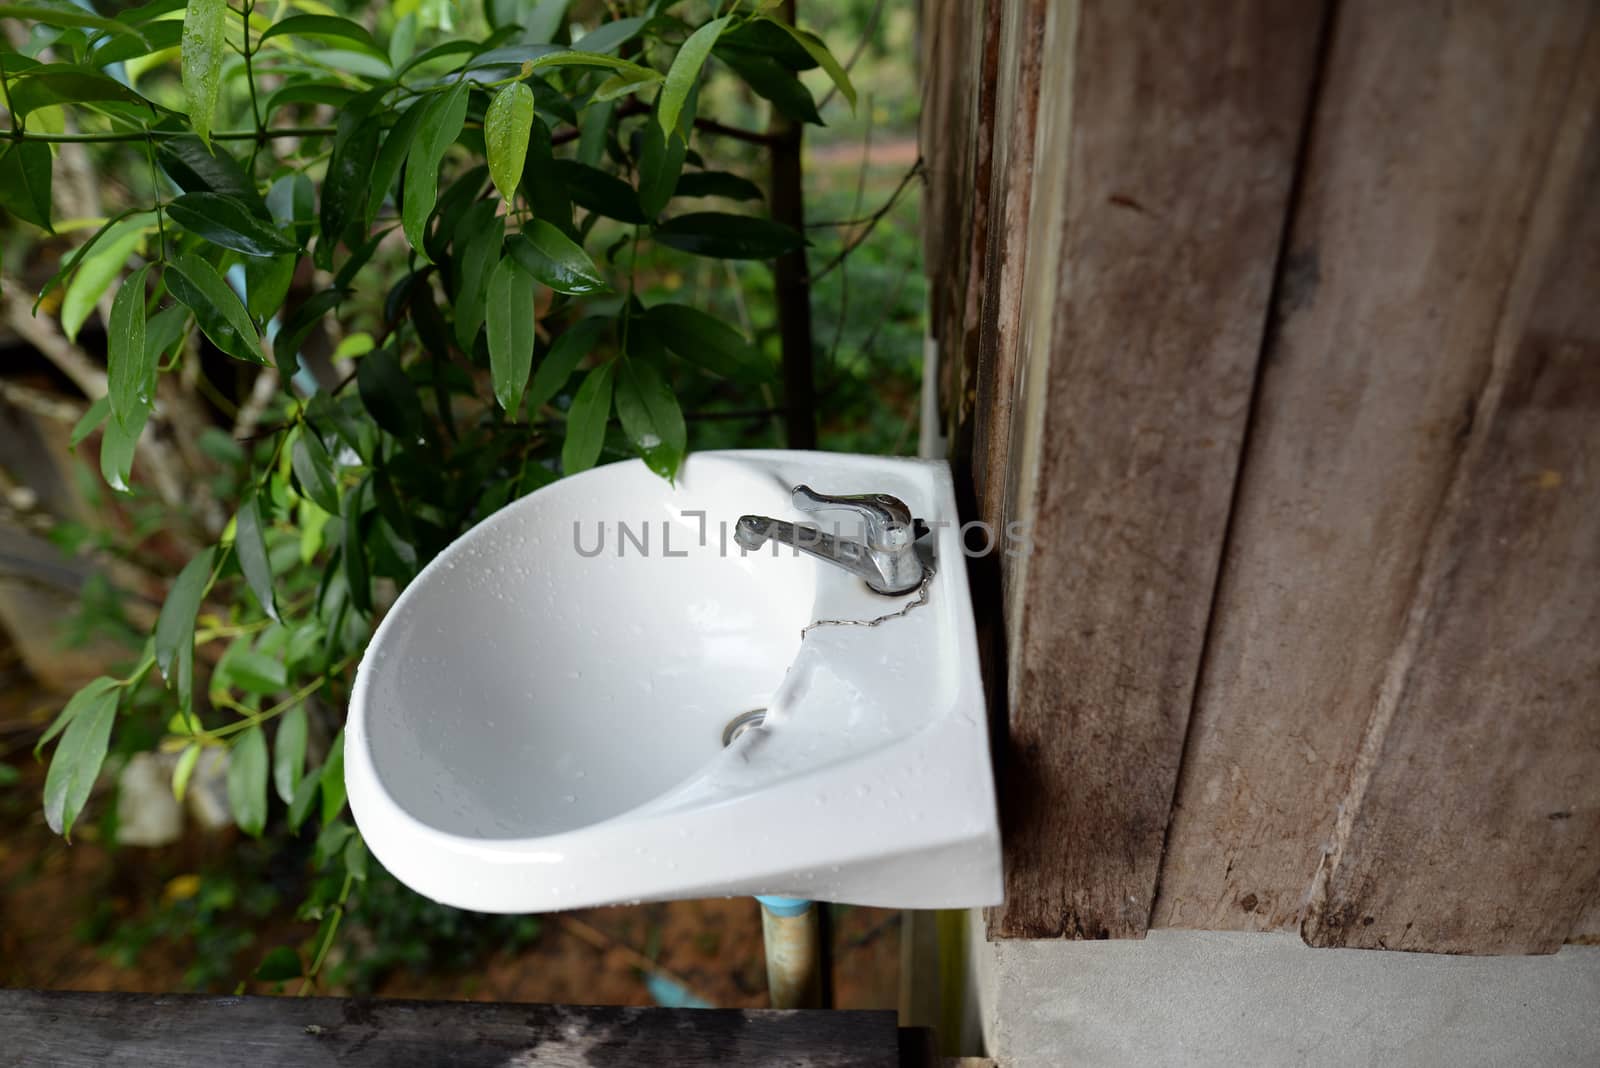 A white ceramic washbasin is attached to an old wooden wall with a plant background.